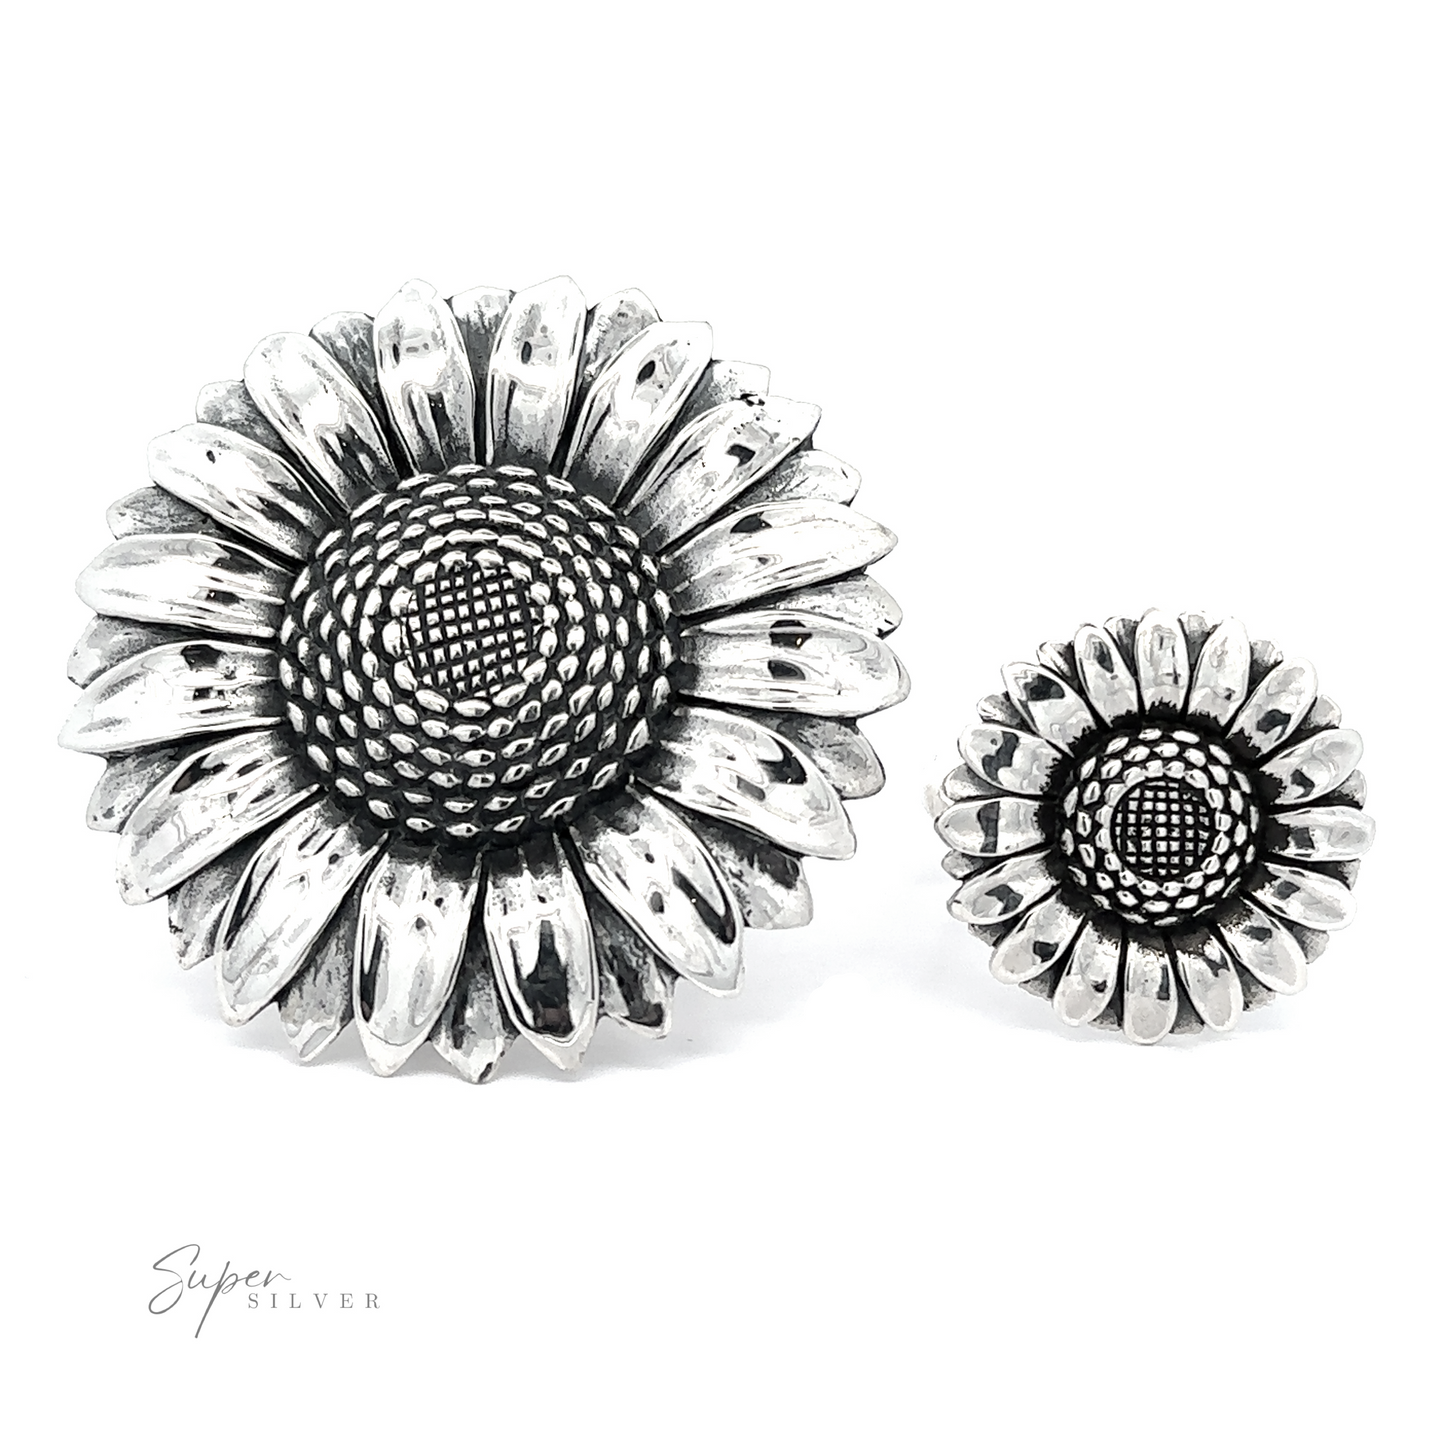 A pair of silver sunflower-shaped earrings of different sizes, showcasing floral elegance with detailed petal designs on a white background.